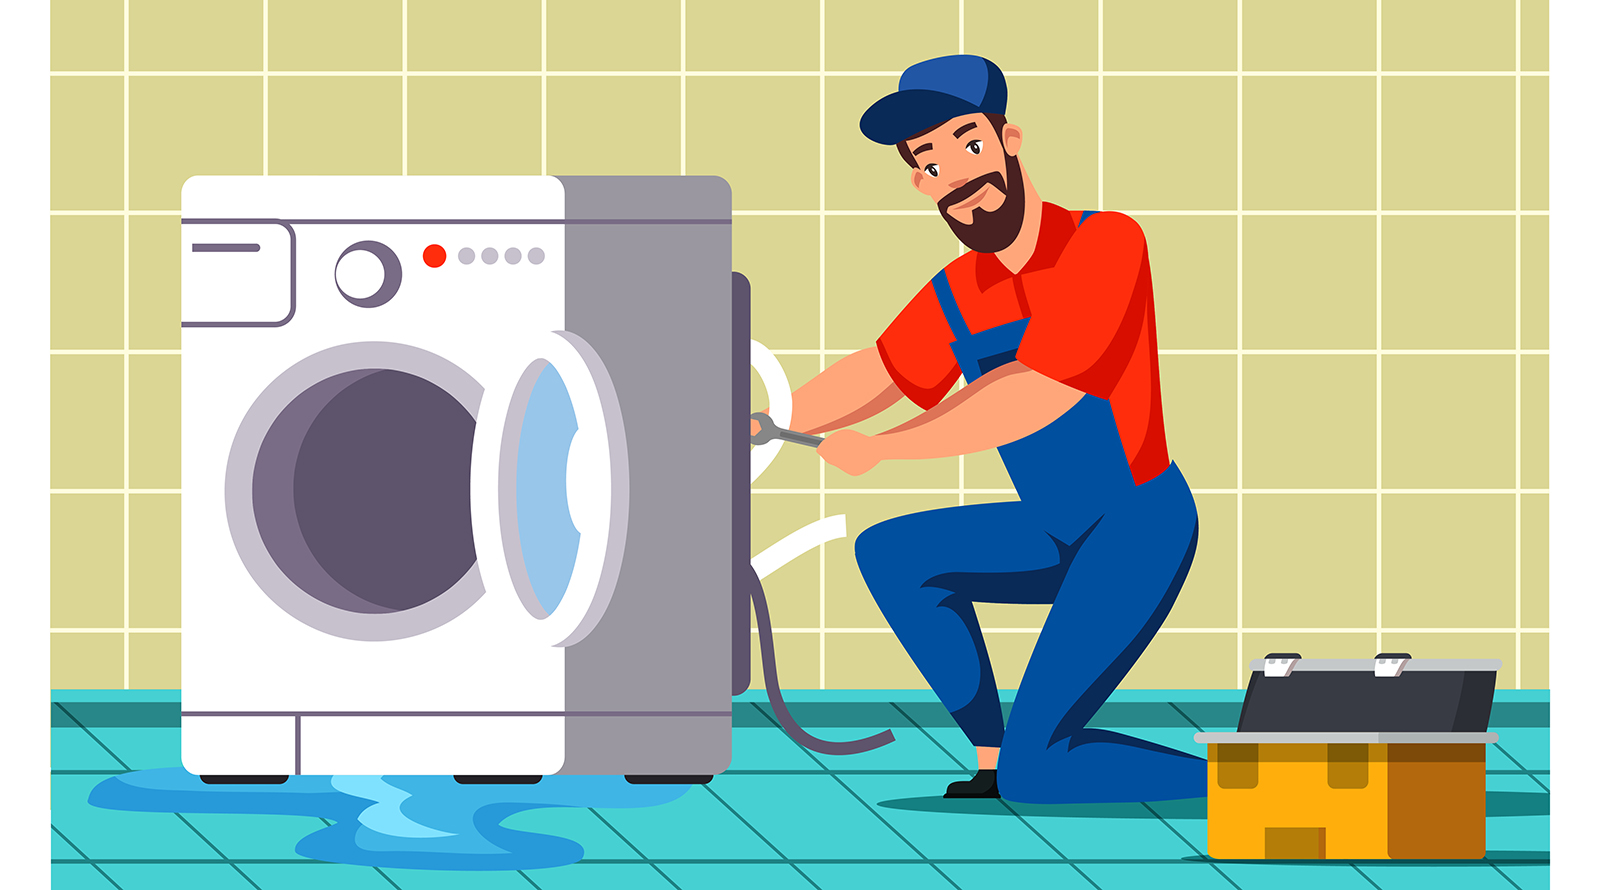 Targeted Appliance Repair Leads For Your Area